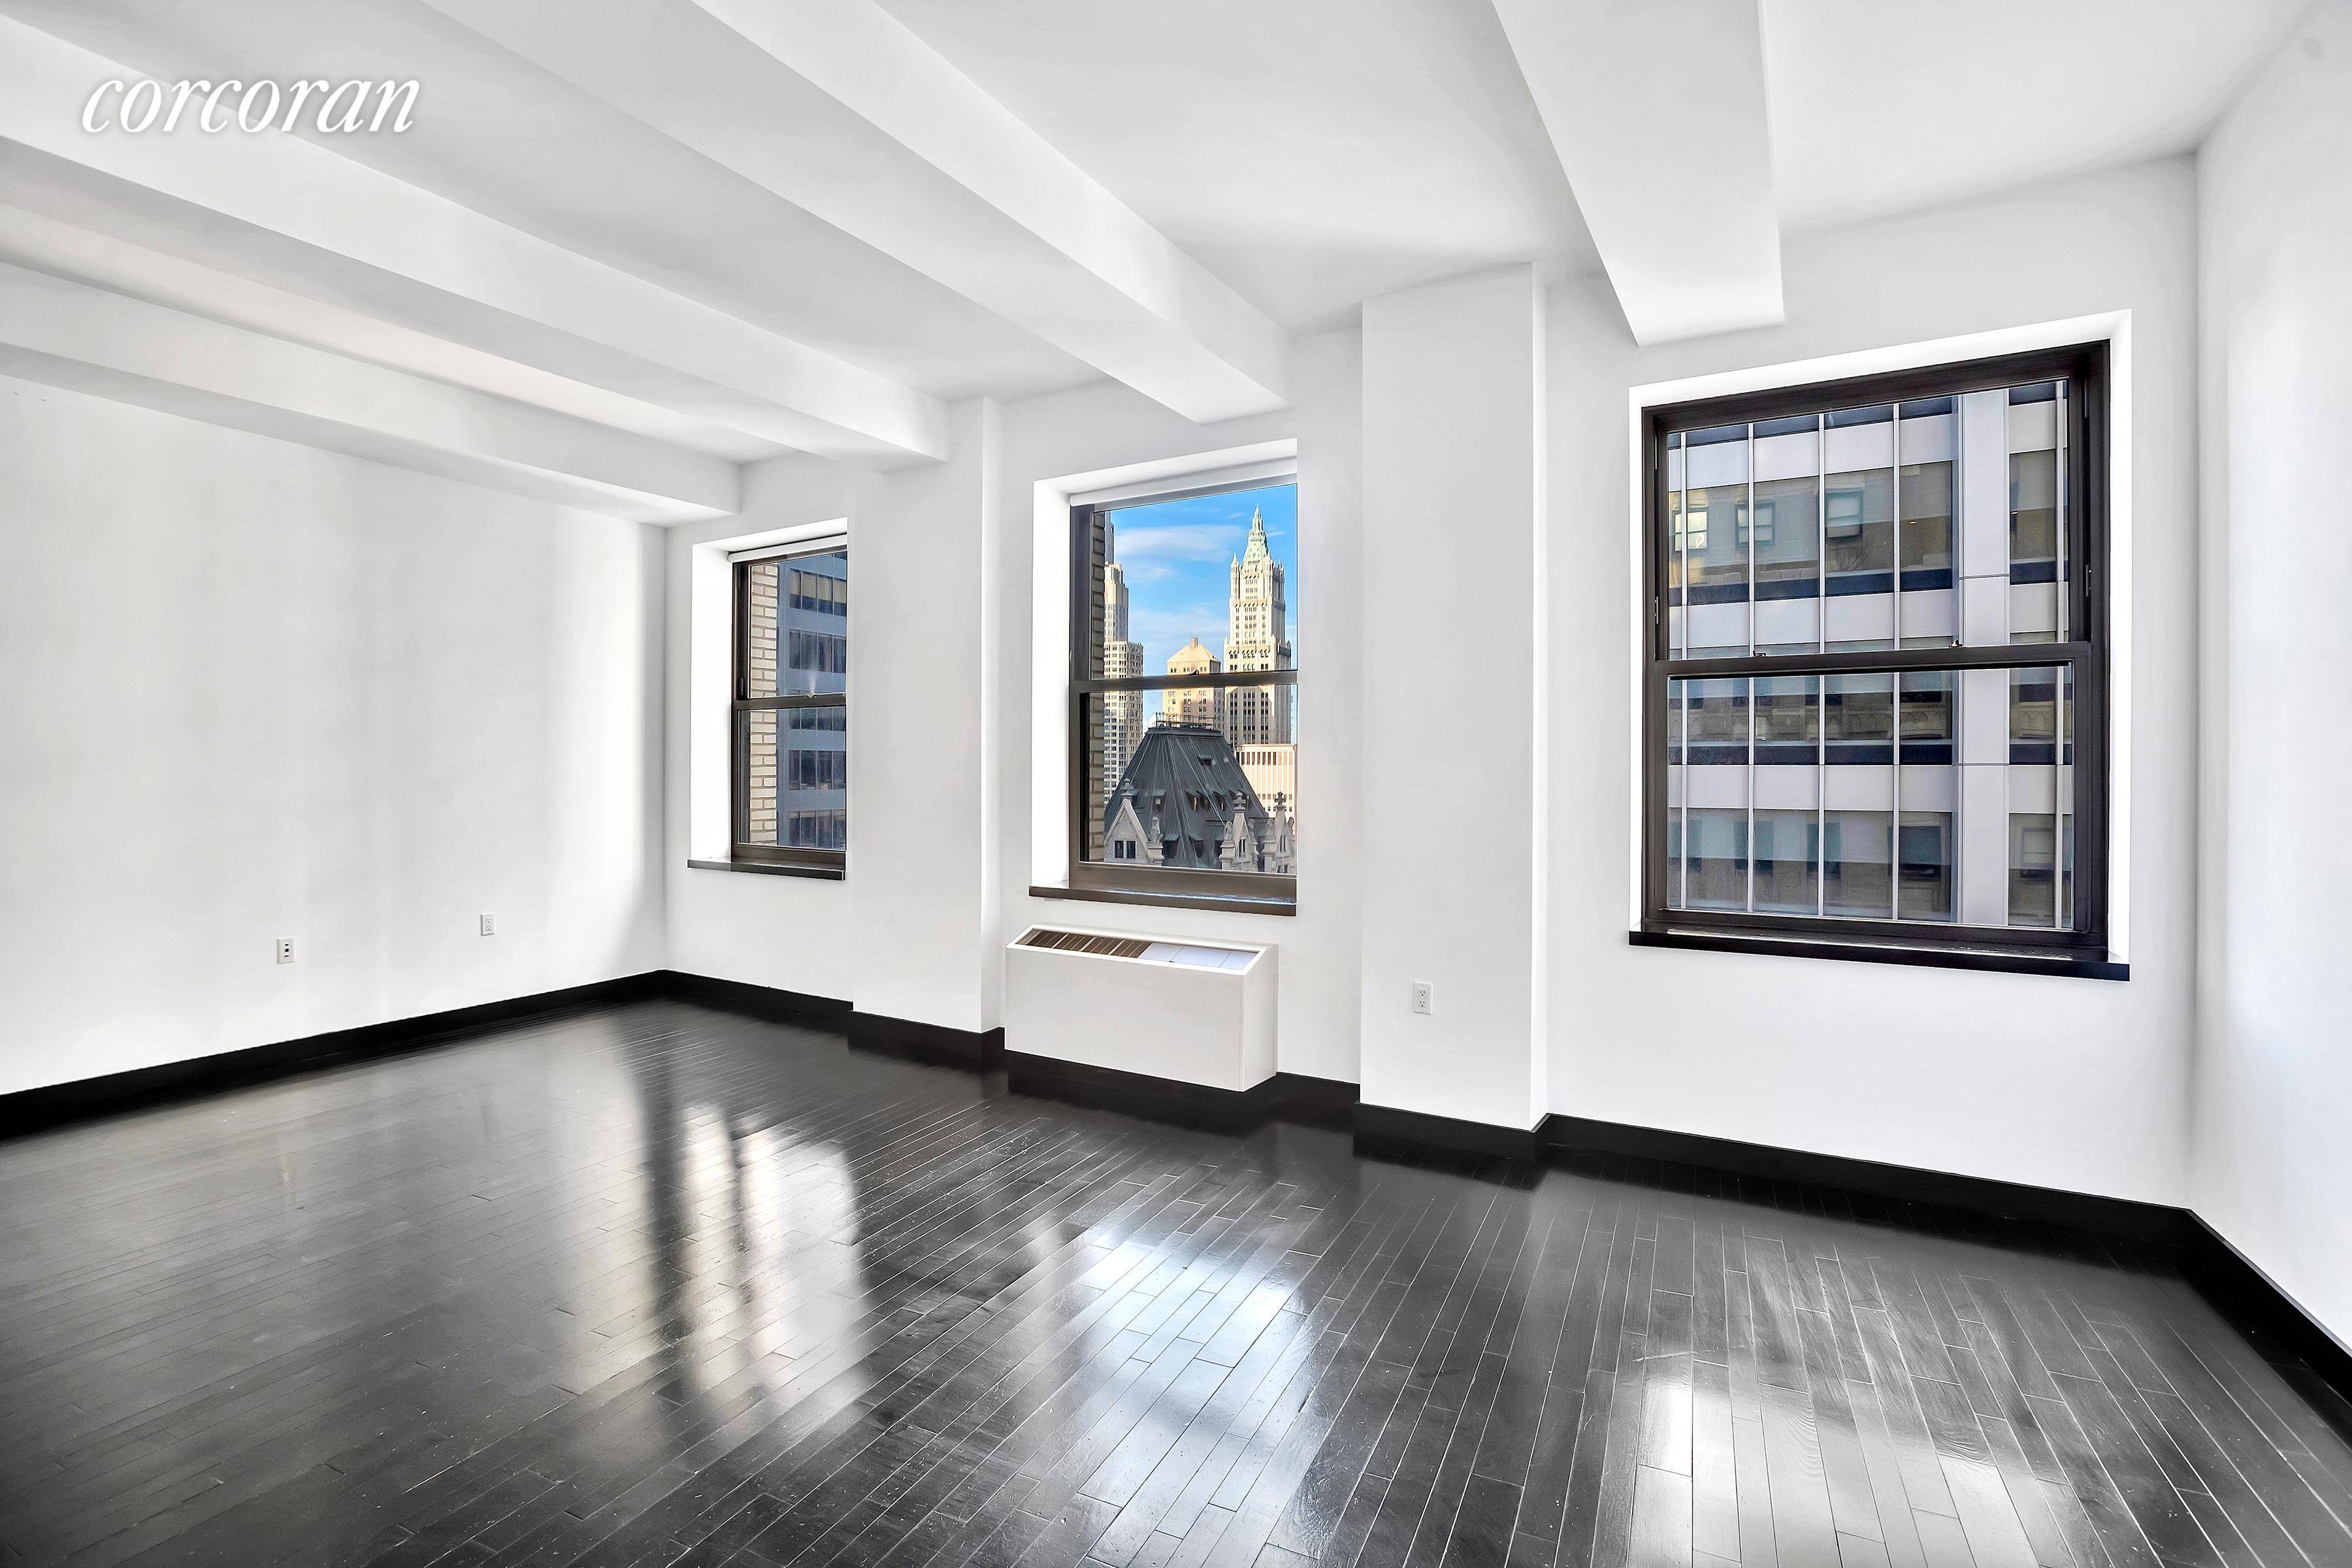 ALL UTILITIES INCLUDED IN RENT except Cable amp ; Internet Gorgeous 1, 197 SF 2 bedroom 2 bath in the acclaimed Armani Casa designed 20 Pine Street.